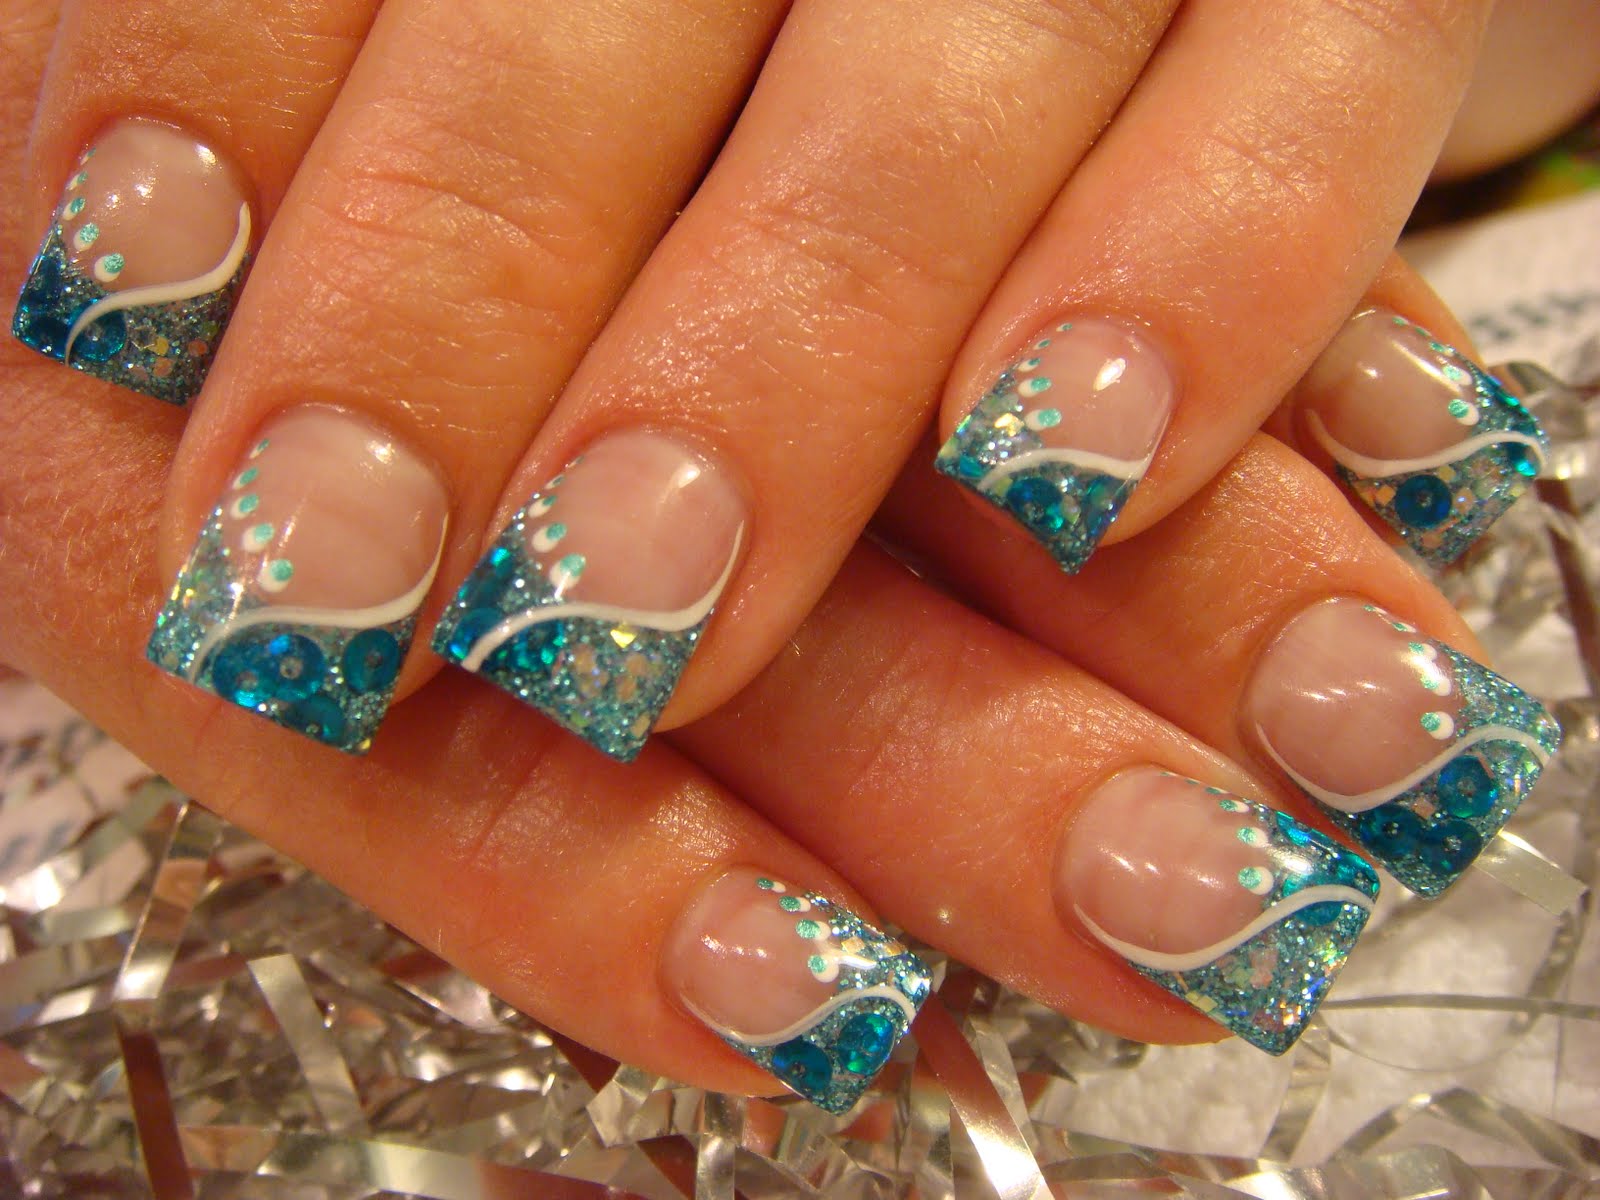 Pin by SaRae Clarkson on Nail'd It Turquoise nails, Turquoise nail